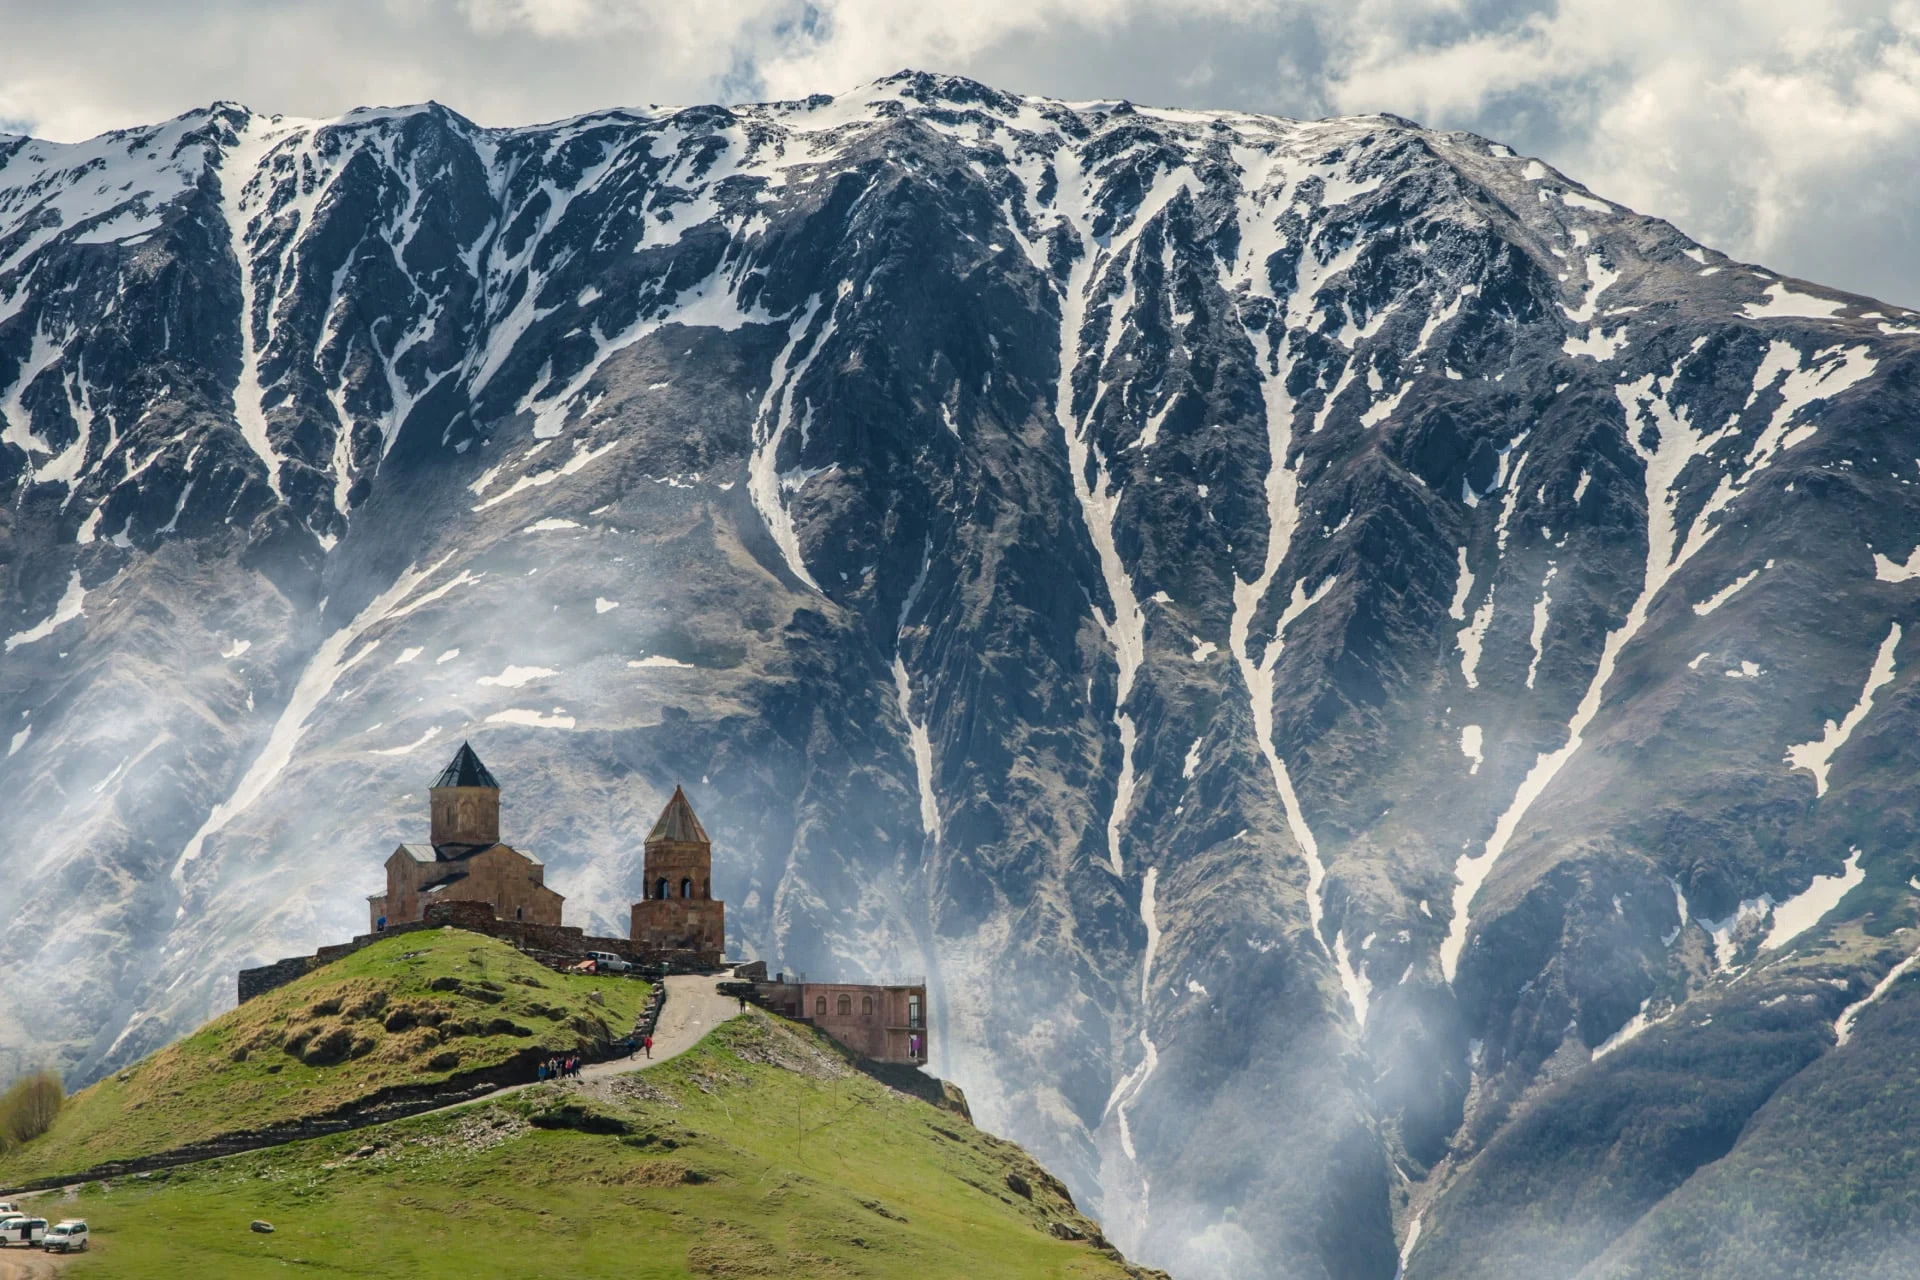 A church sits on top of a mountain.